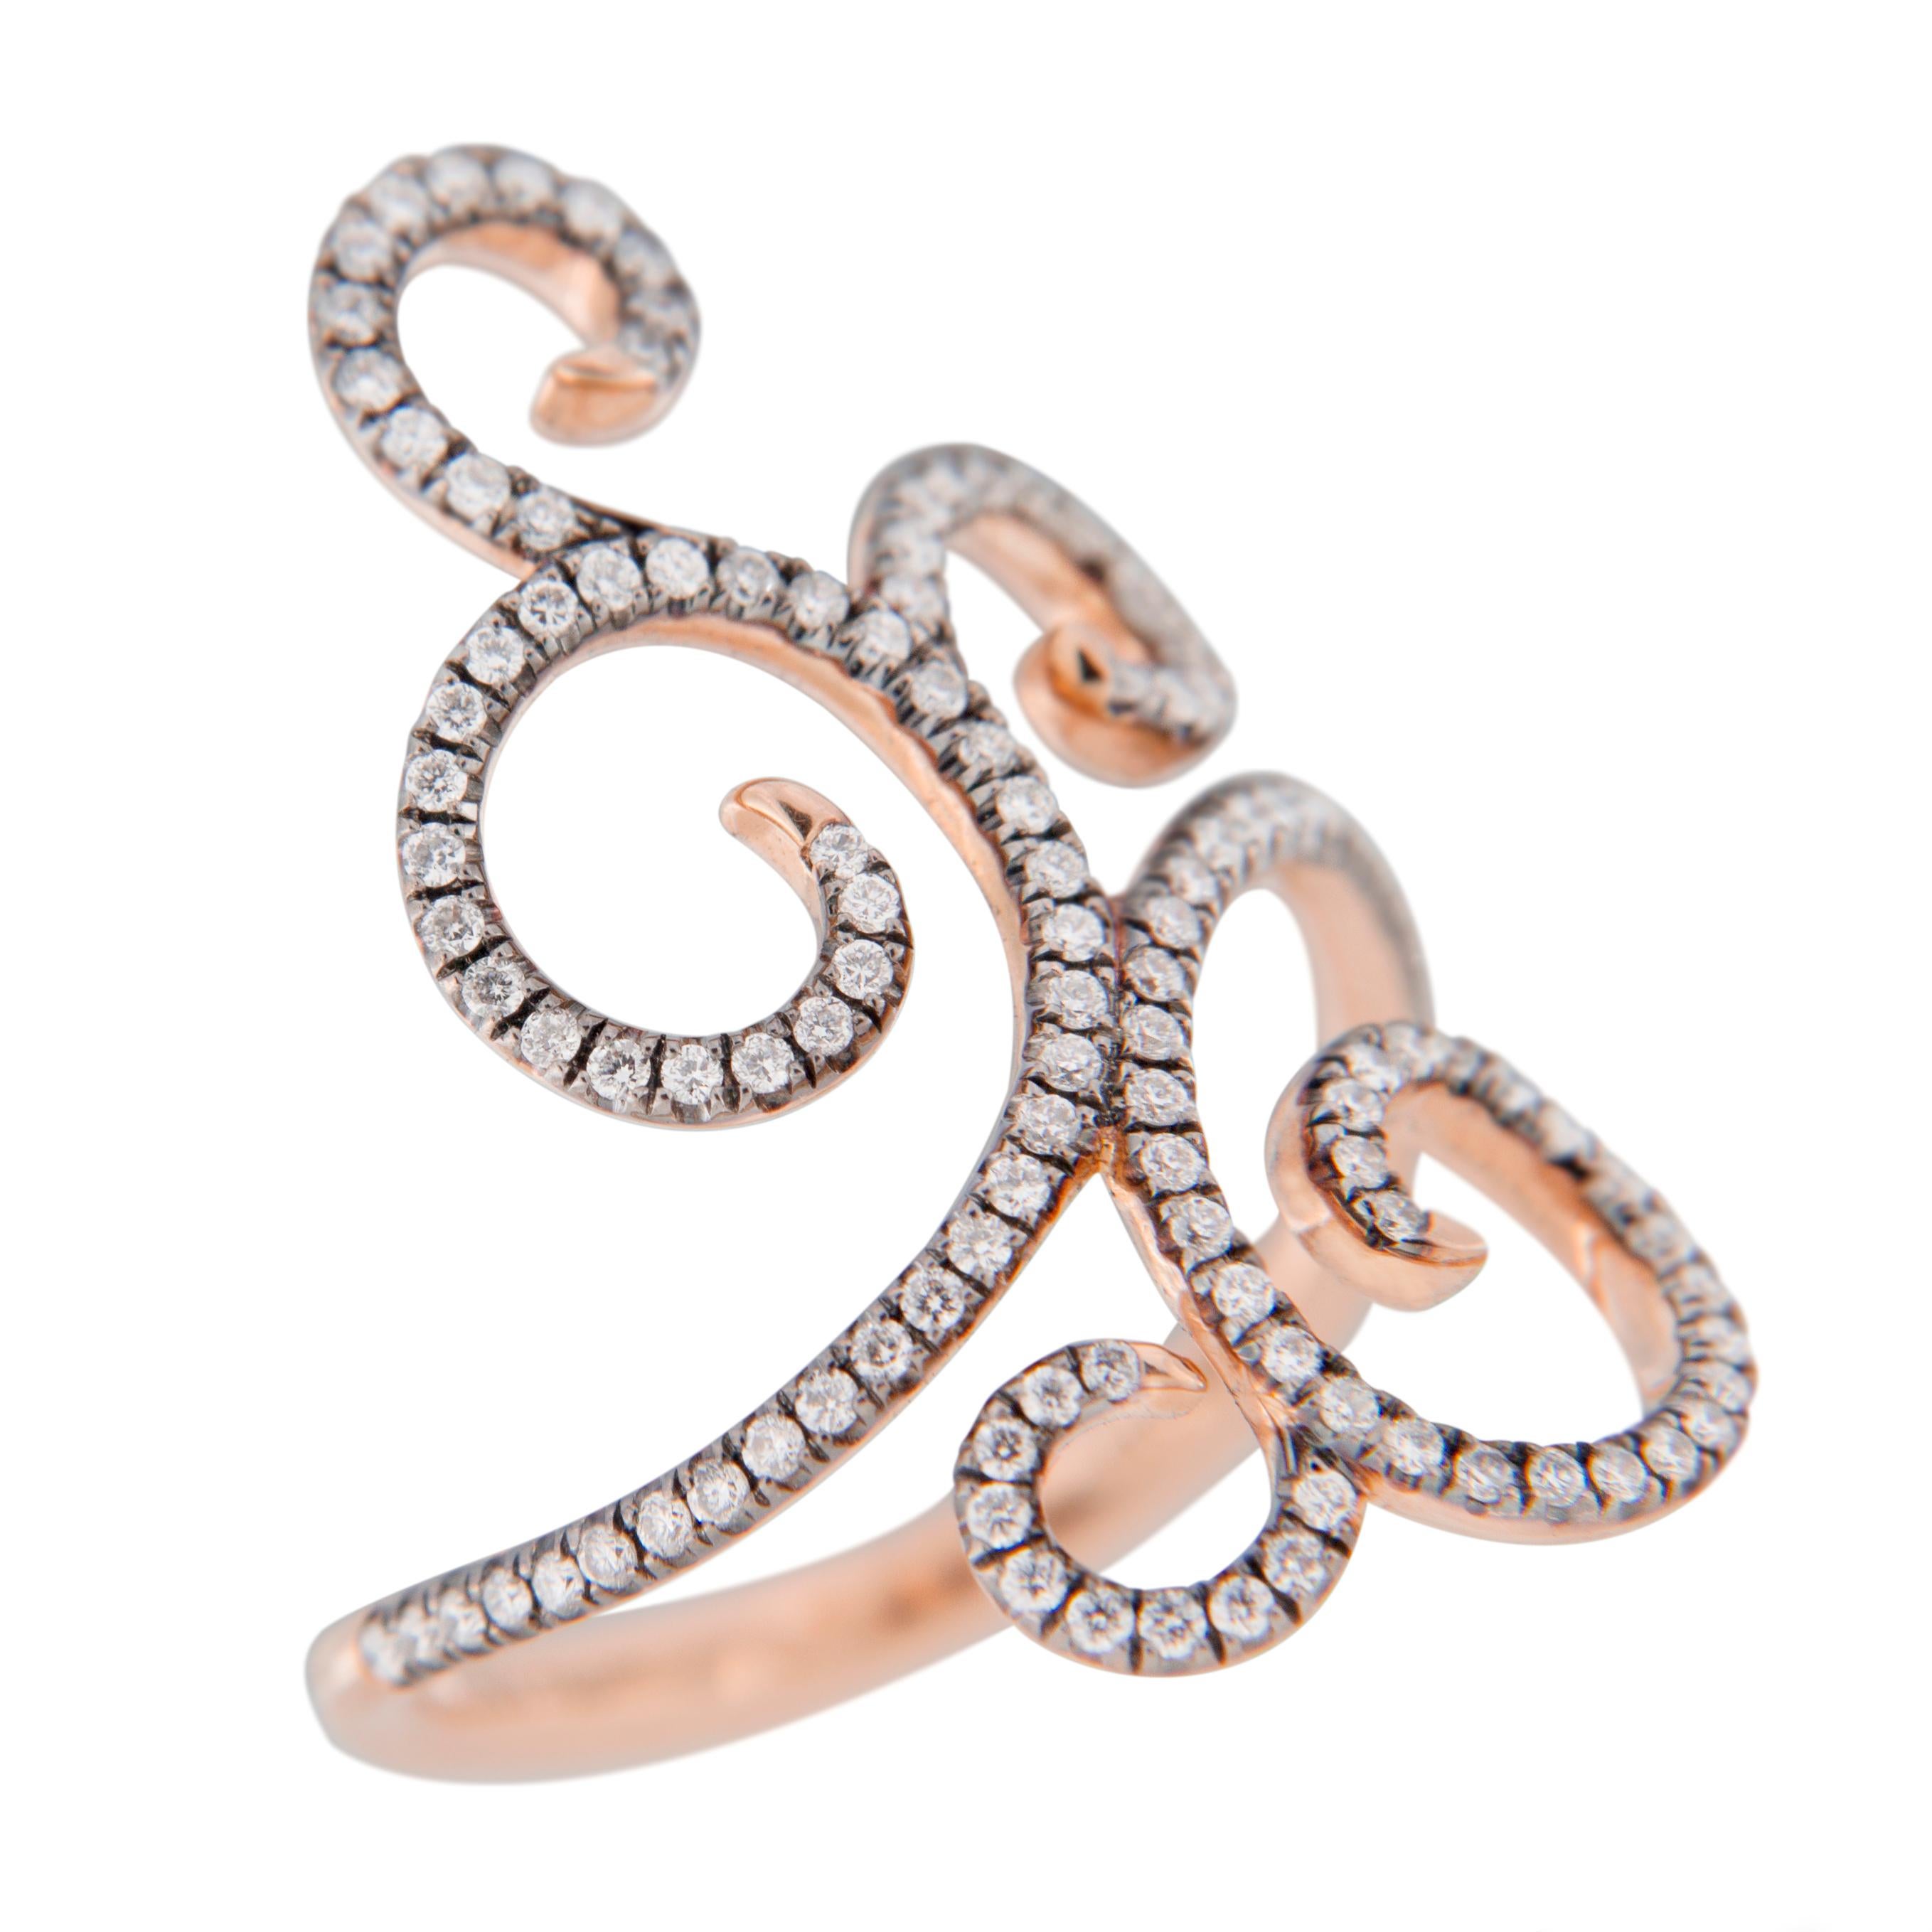 Jona design collection, hand crafted in Italy,  18 karat rose gold diamond Ghirigori ring, set with 120 diamonds,  F color/VVS1 clarity, for a total 0.36 carats with black rhodium setting.Ring size 6.5 US.
Also available in white gold.
All Jona